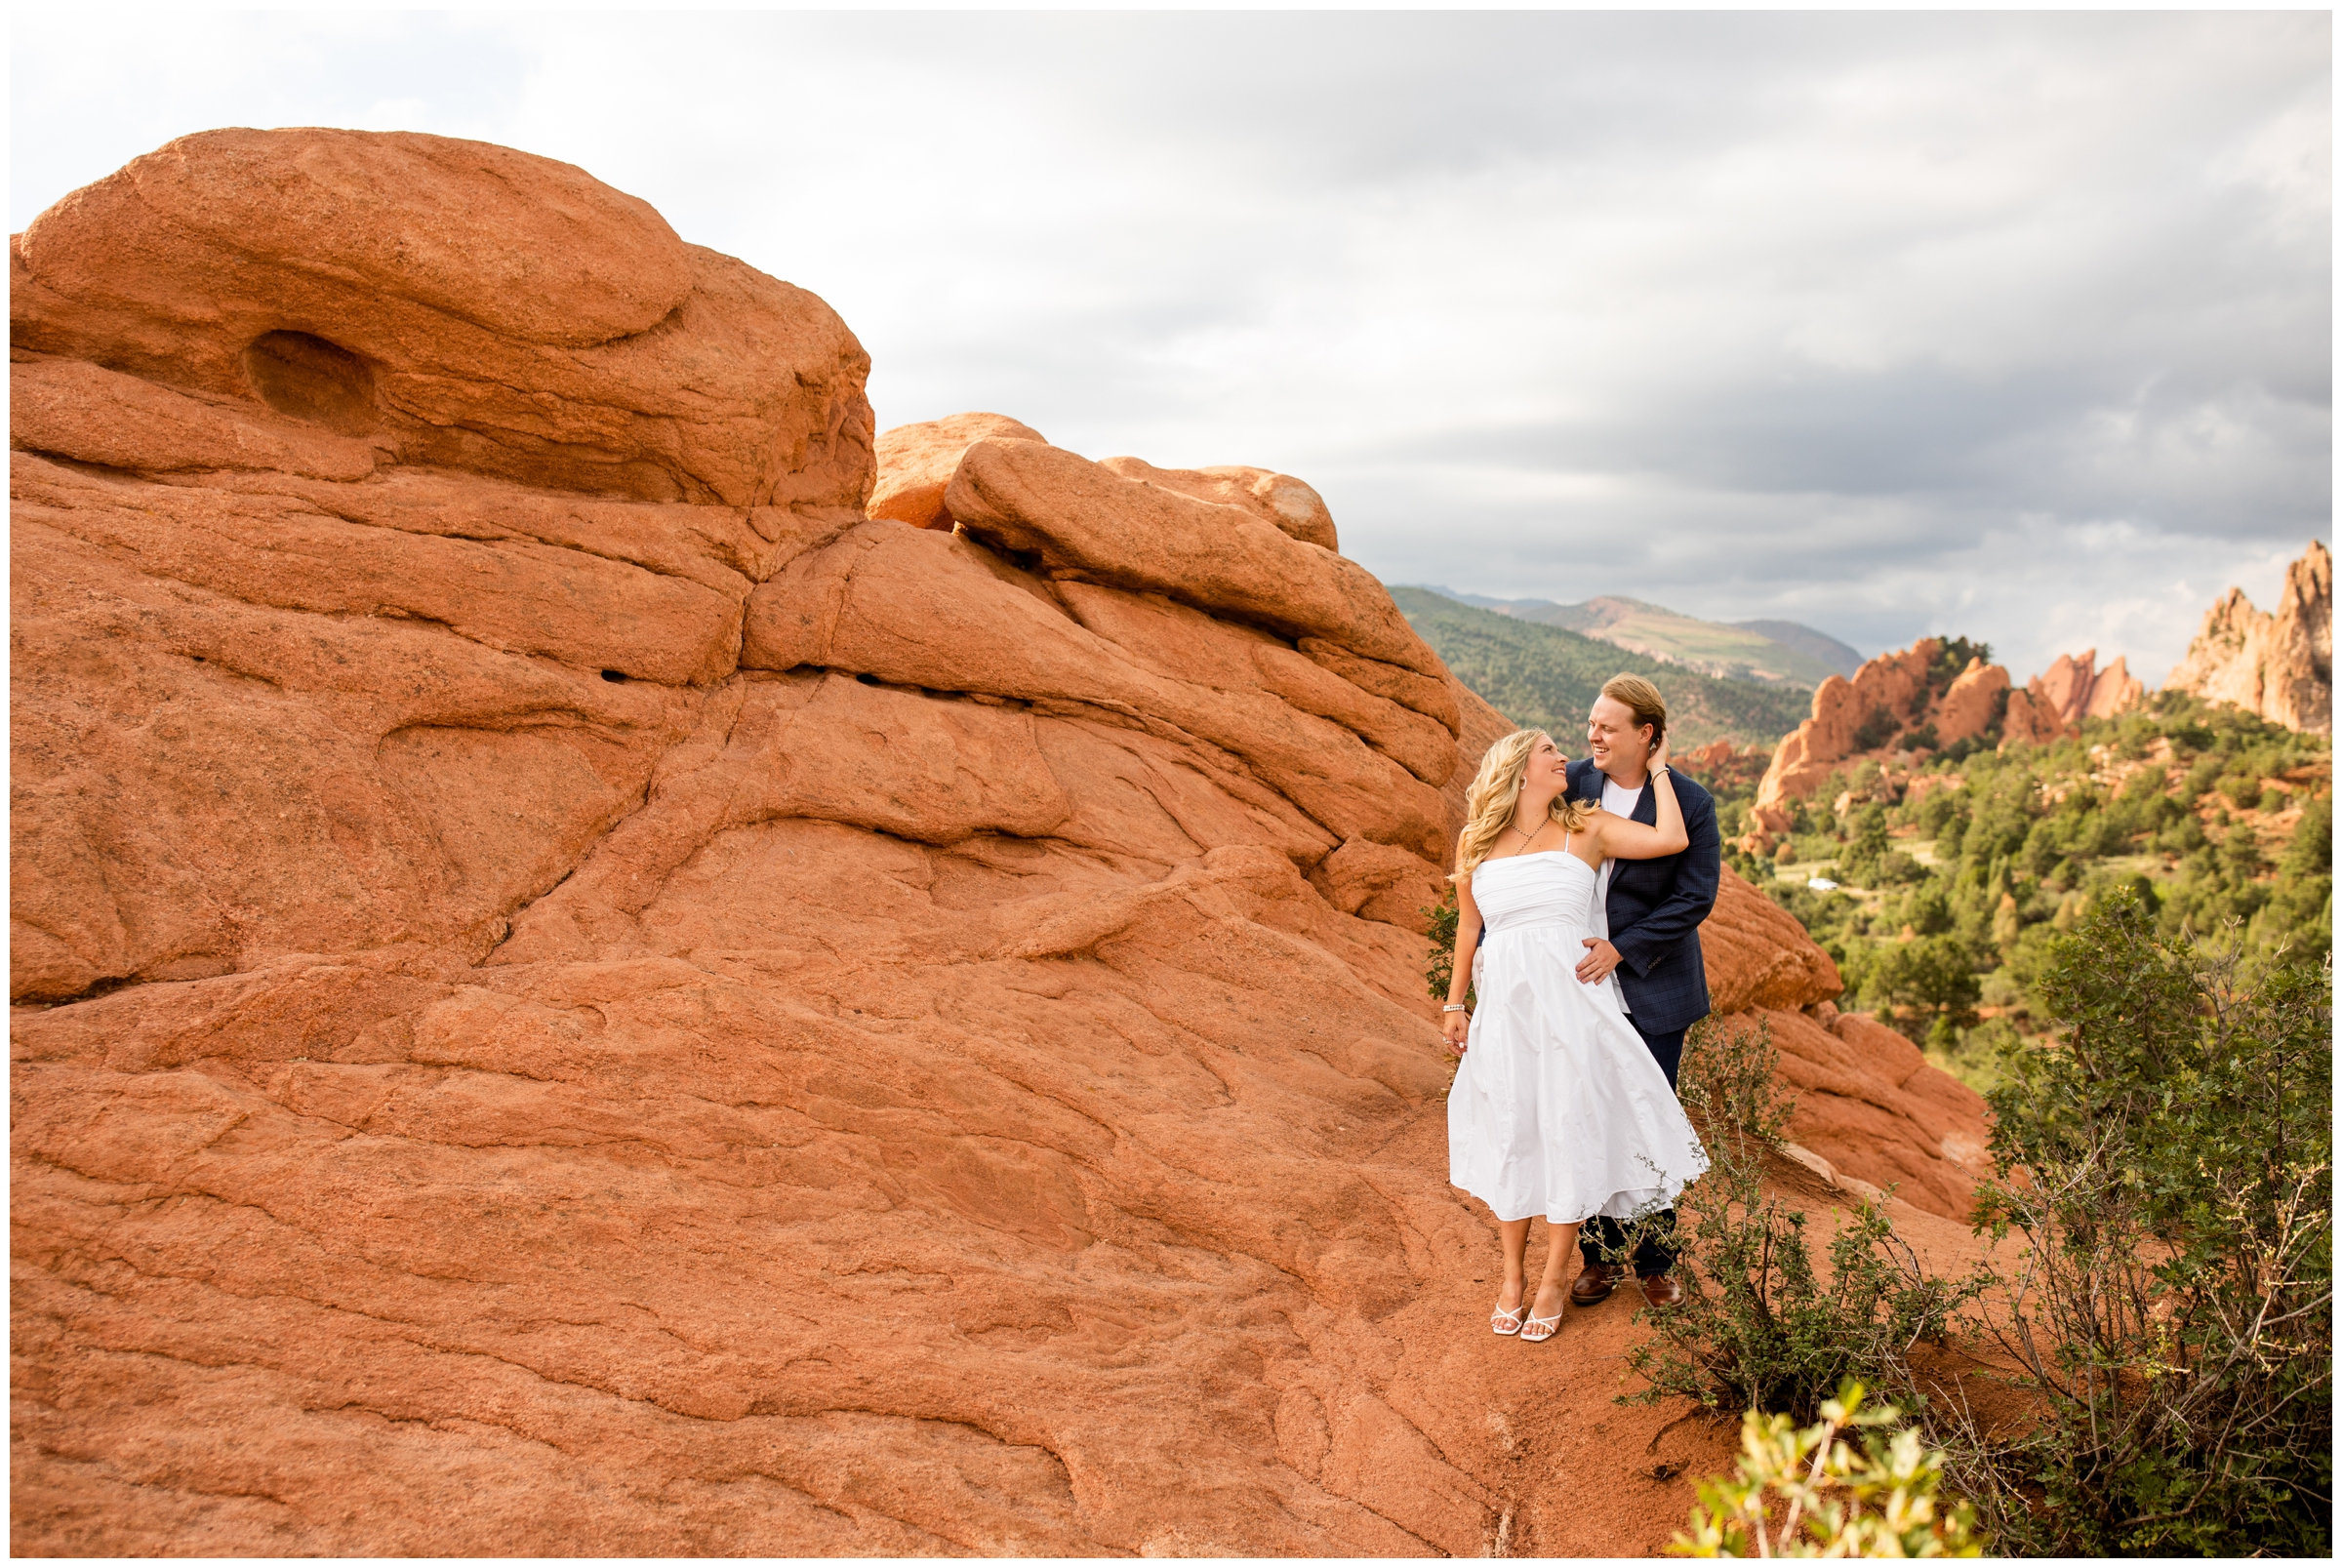 epic engagement photography locations in Colorado at Garden of the Gods